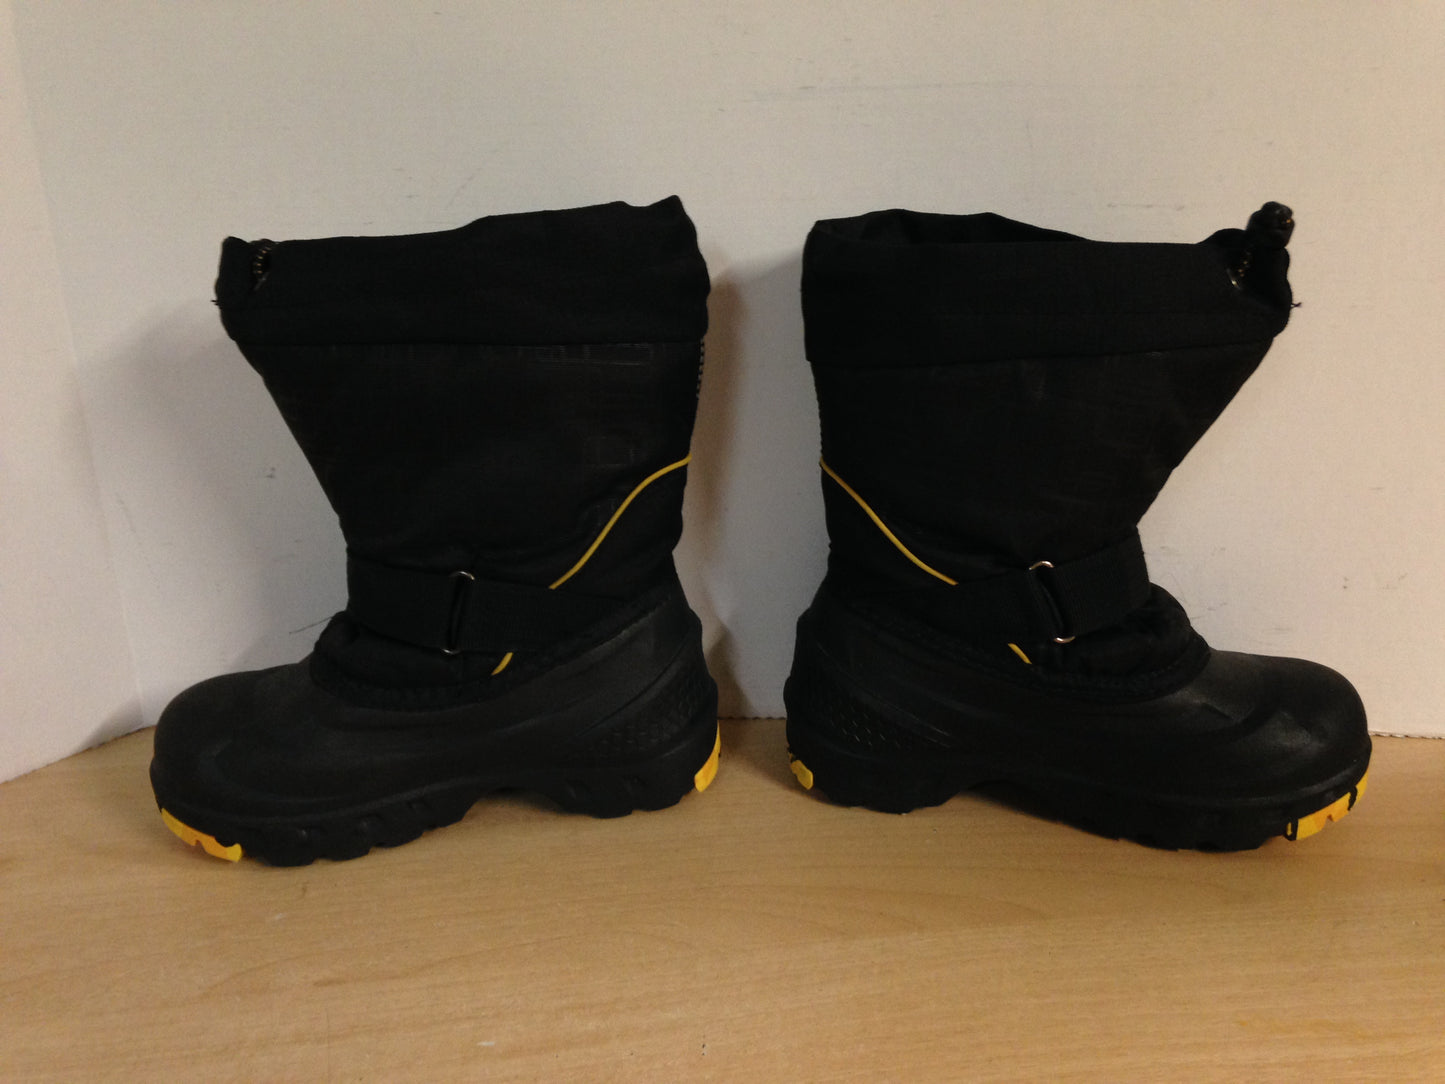 Winter Boots Child Size 1 Weather Spirit Black And Yello With Liners Excellent